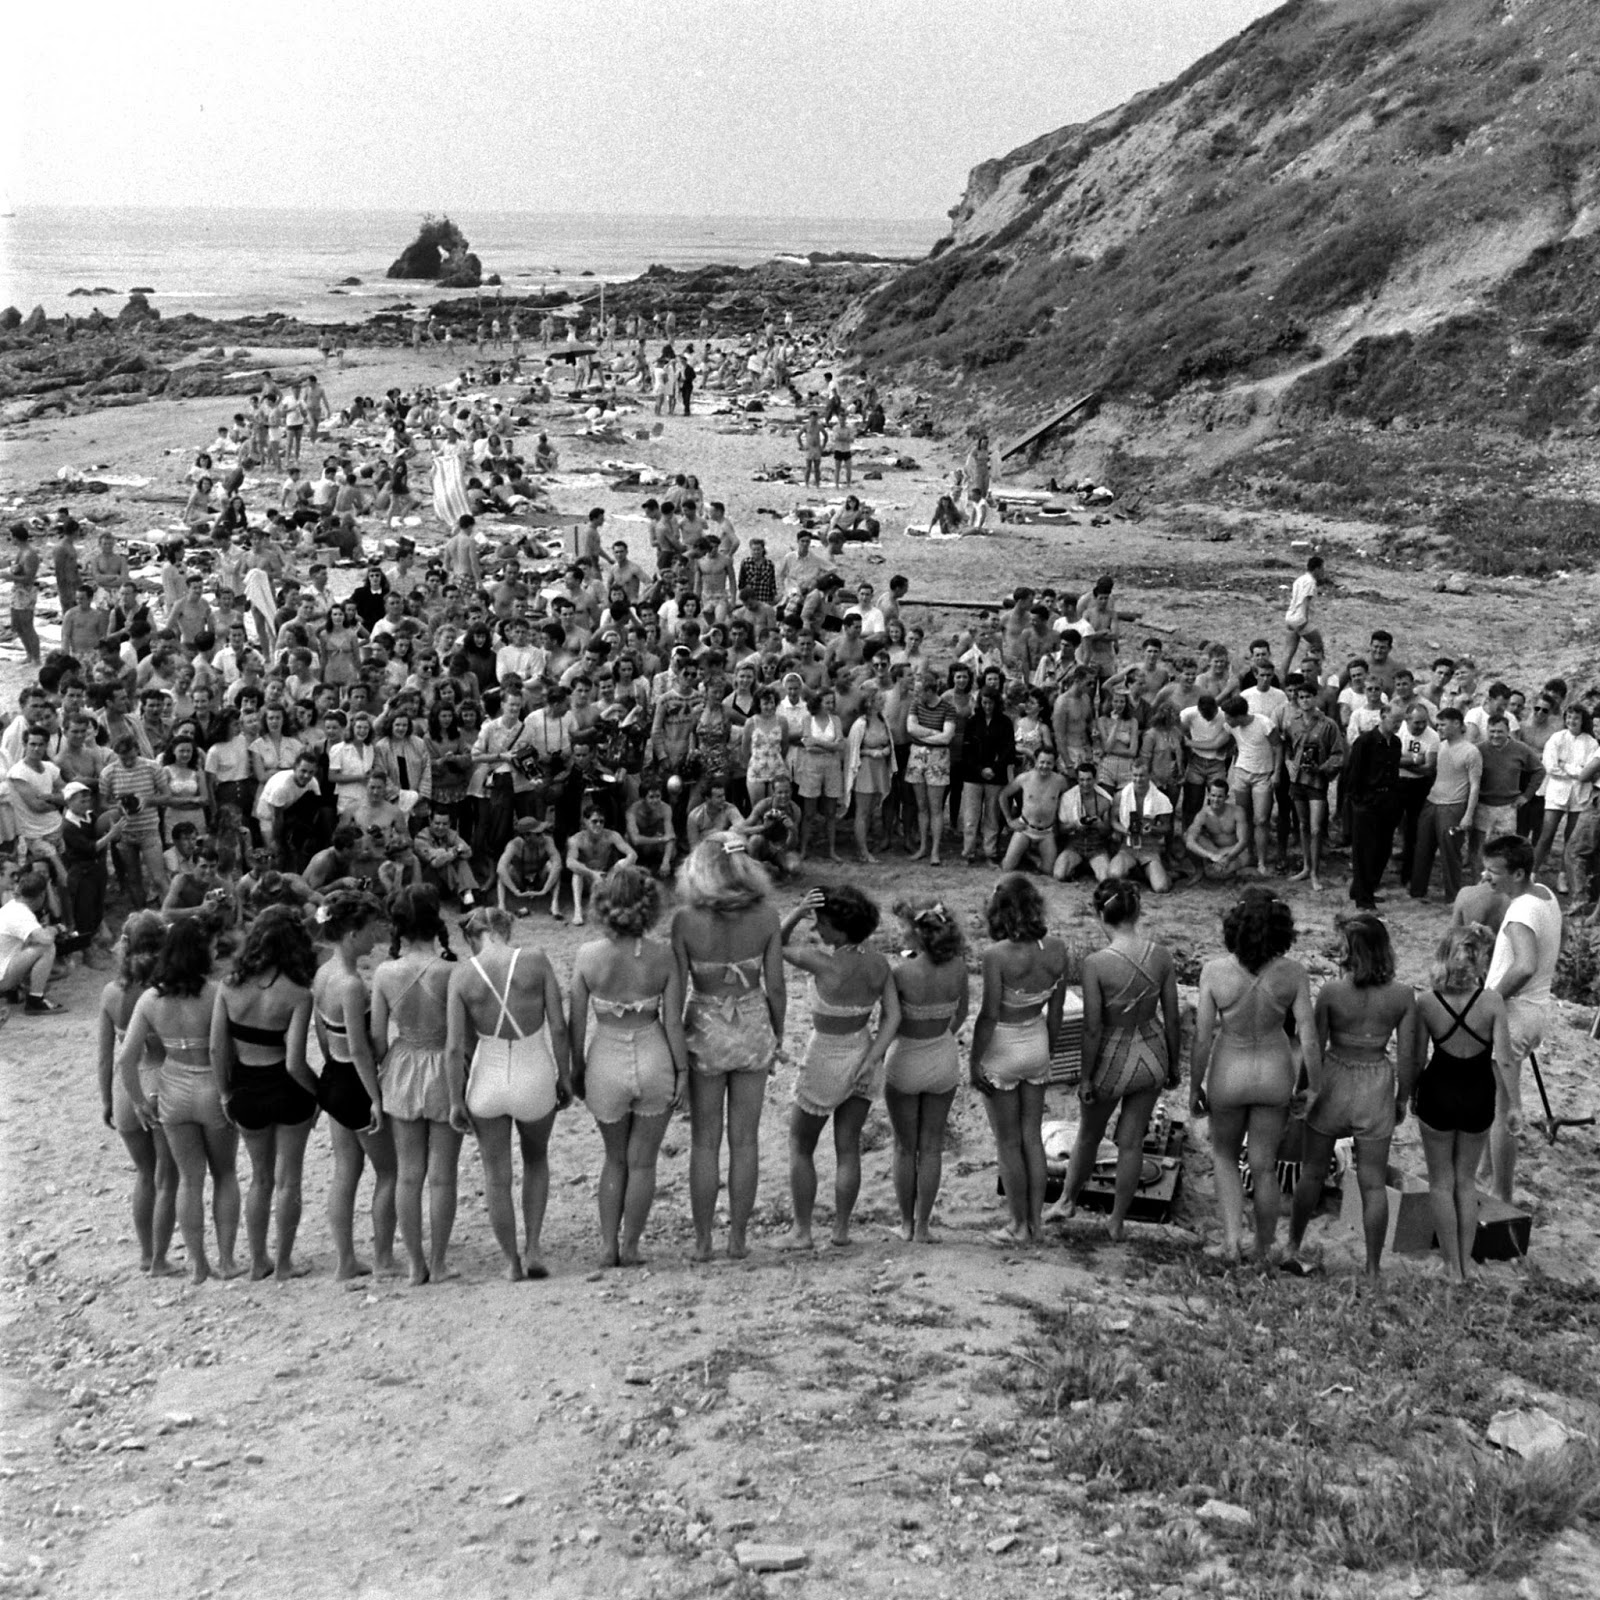 Fascinating Vintage Photographs That Show What Spring Break Looked Like in Southern California in the 1940s